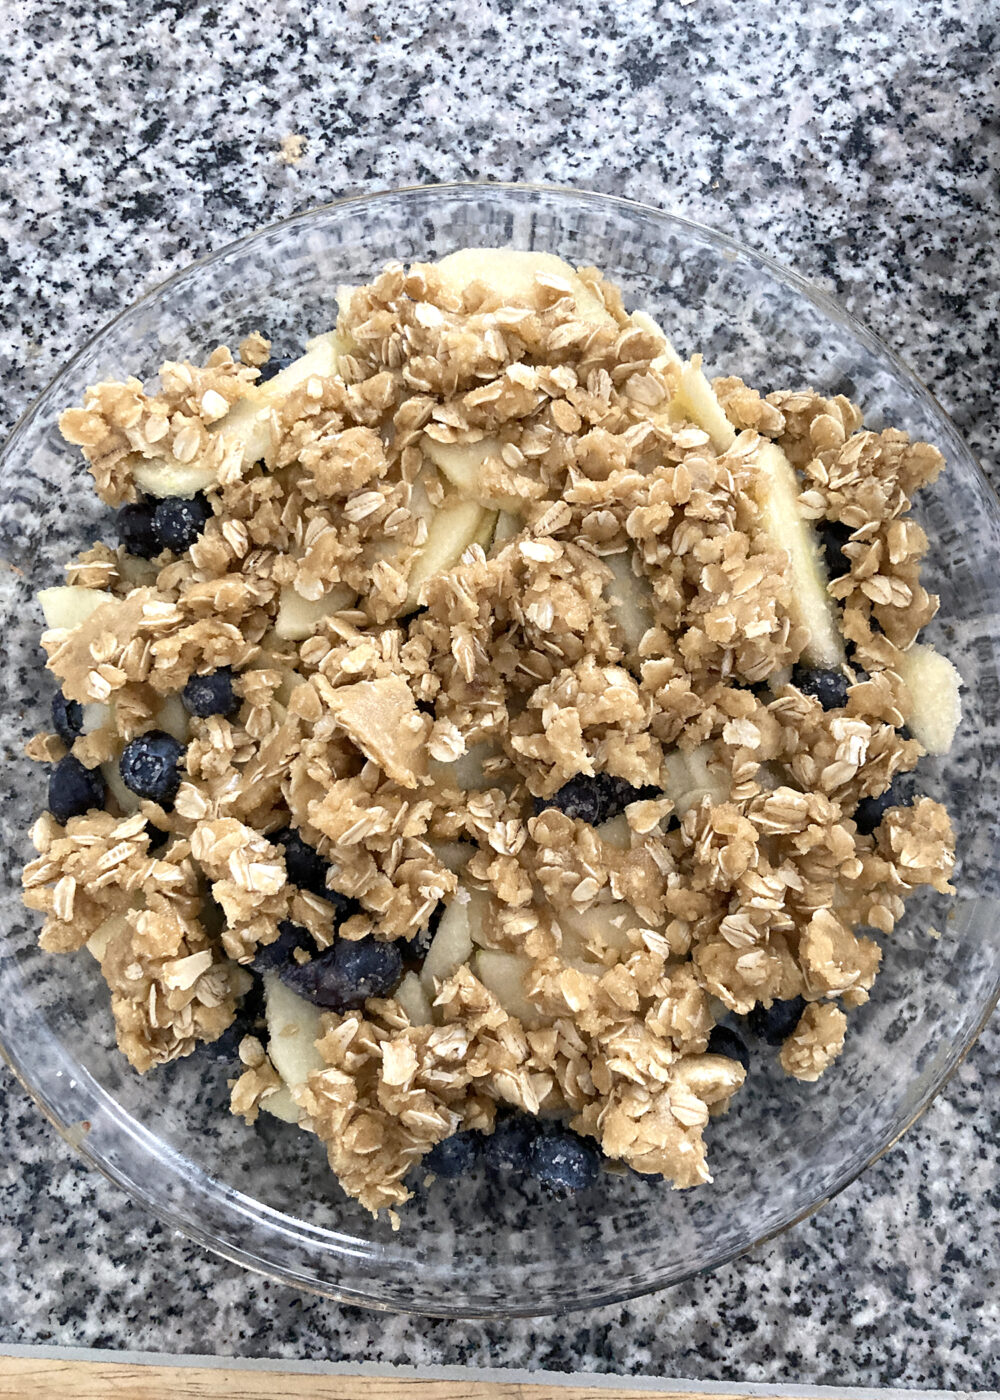 An unbaked Apple Blueberry Crisp sits in a clear glass pie plate on a countertop.